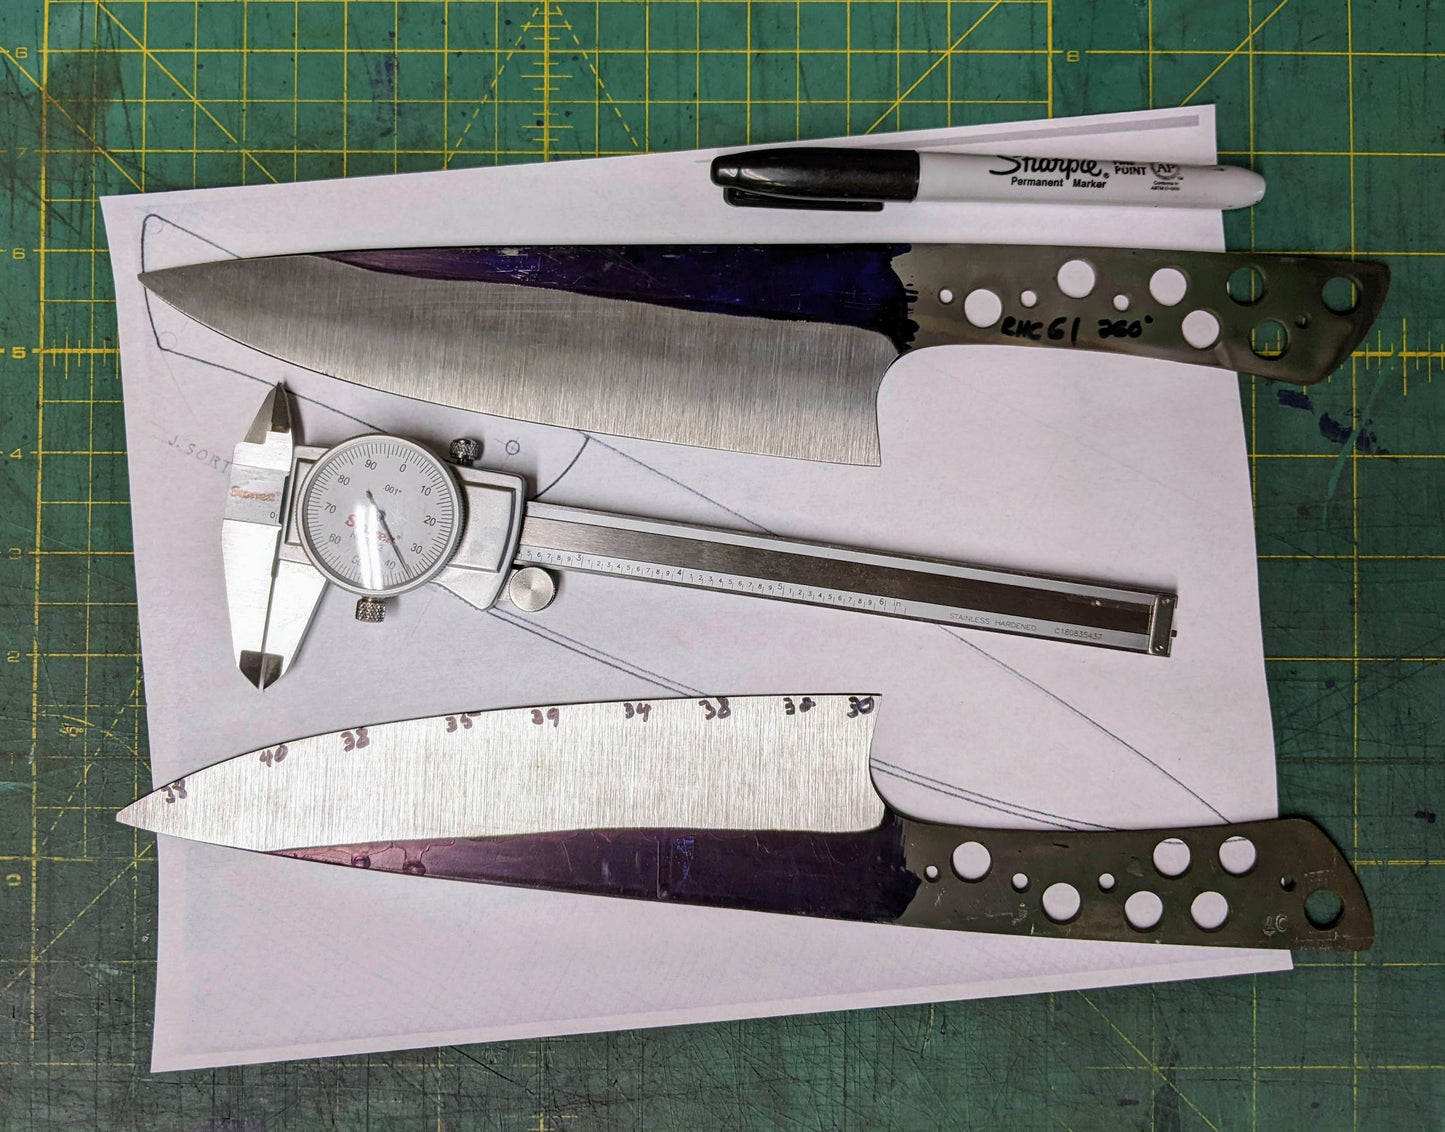 two kitchen knives under construction. A dial caliper, pen and drawing of a knife on a green background 